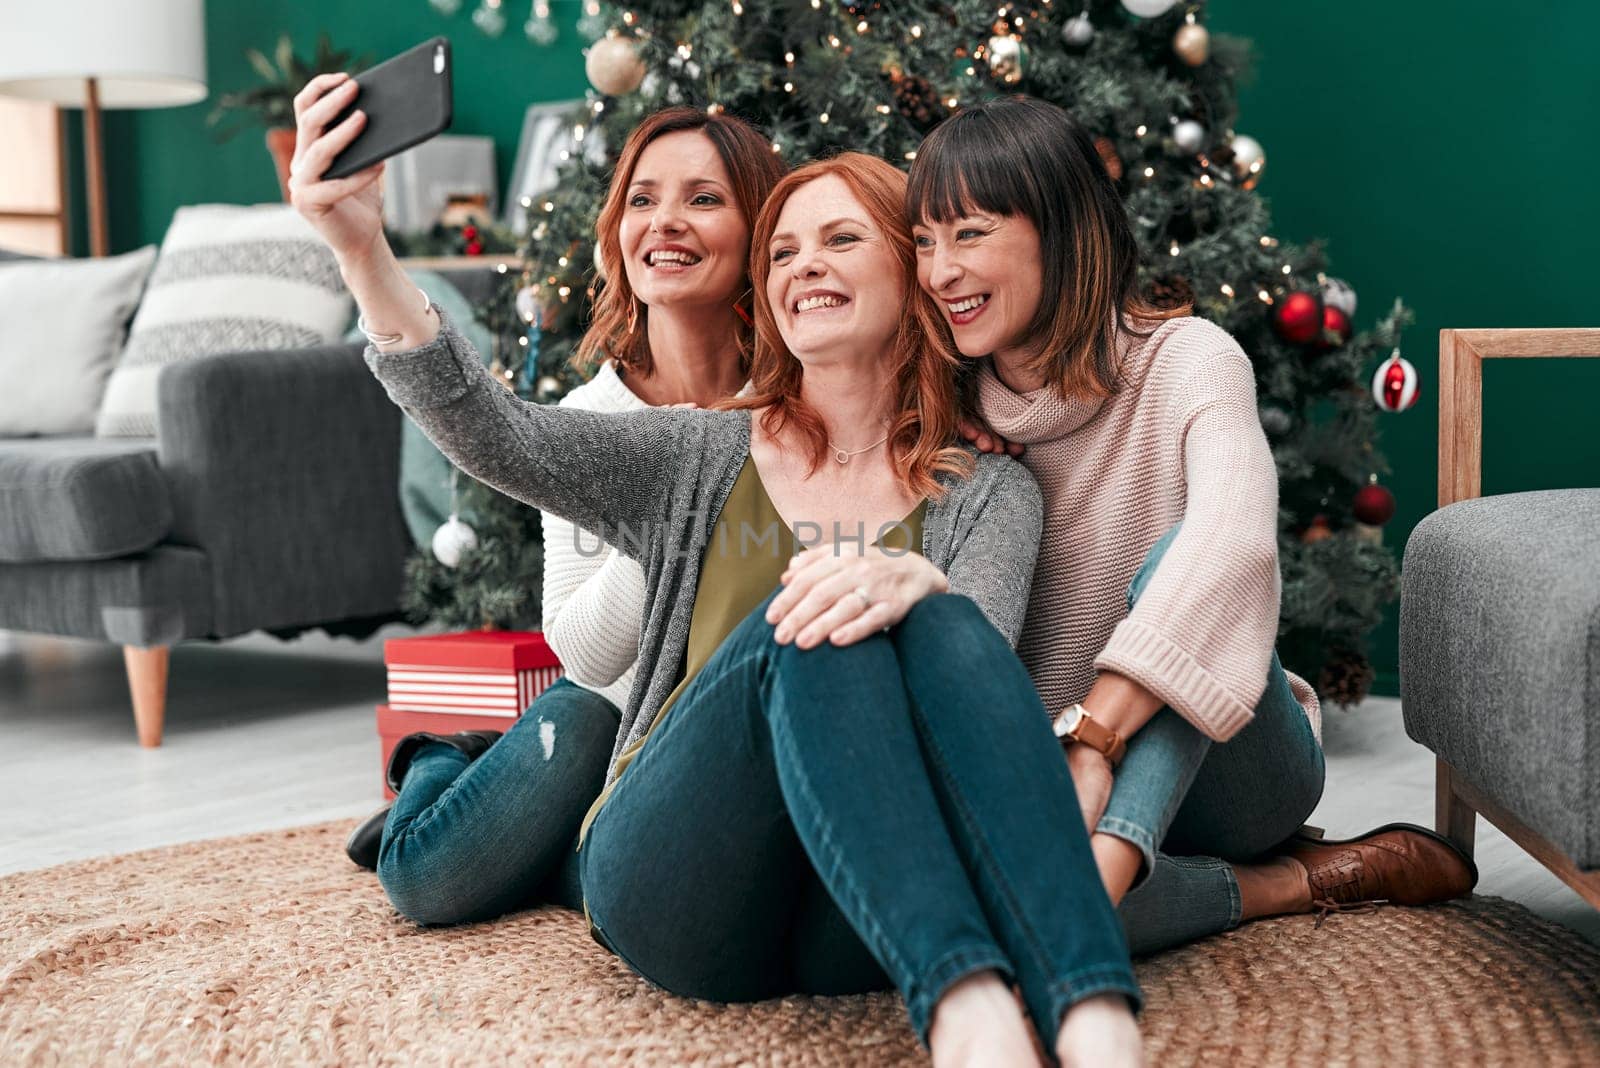 So that well remember forever. three attractive women taking Christmas selfies together at home. by YuriArcurs